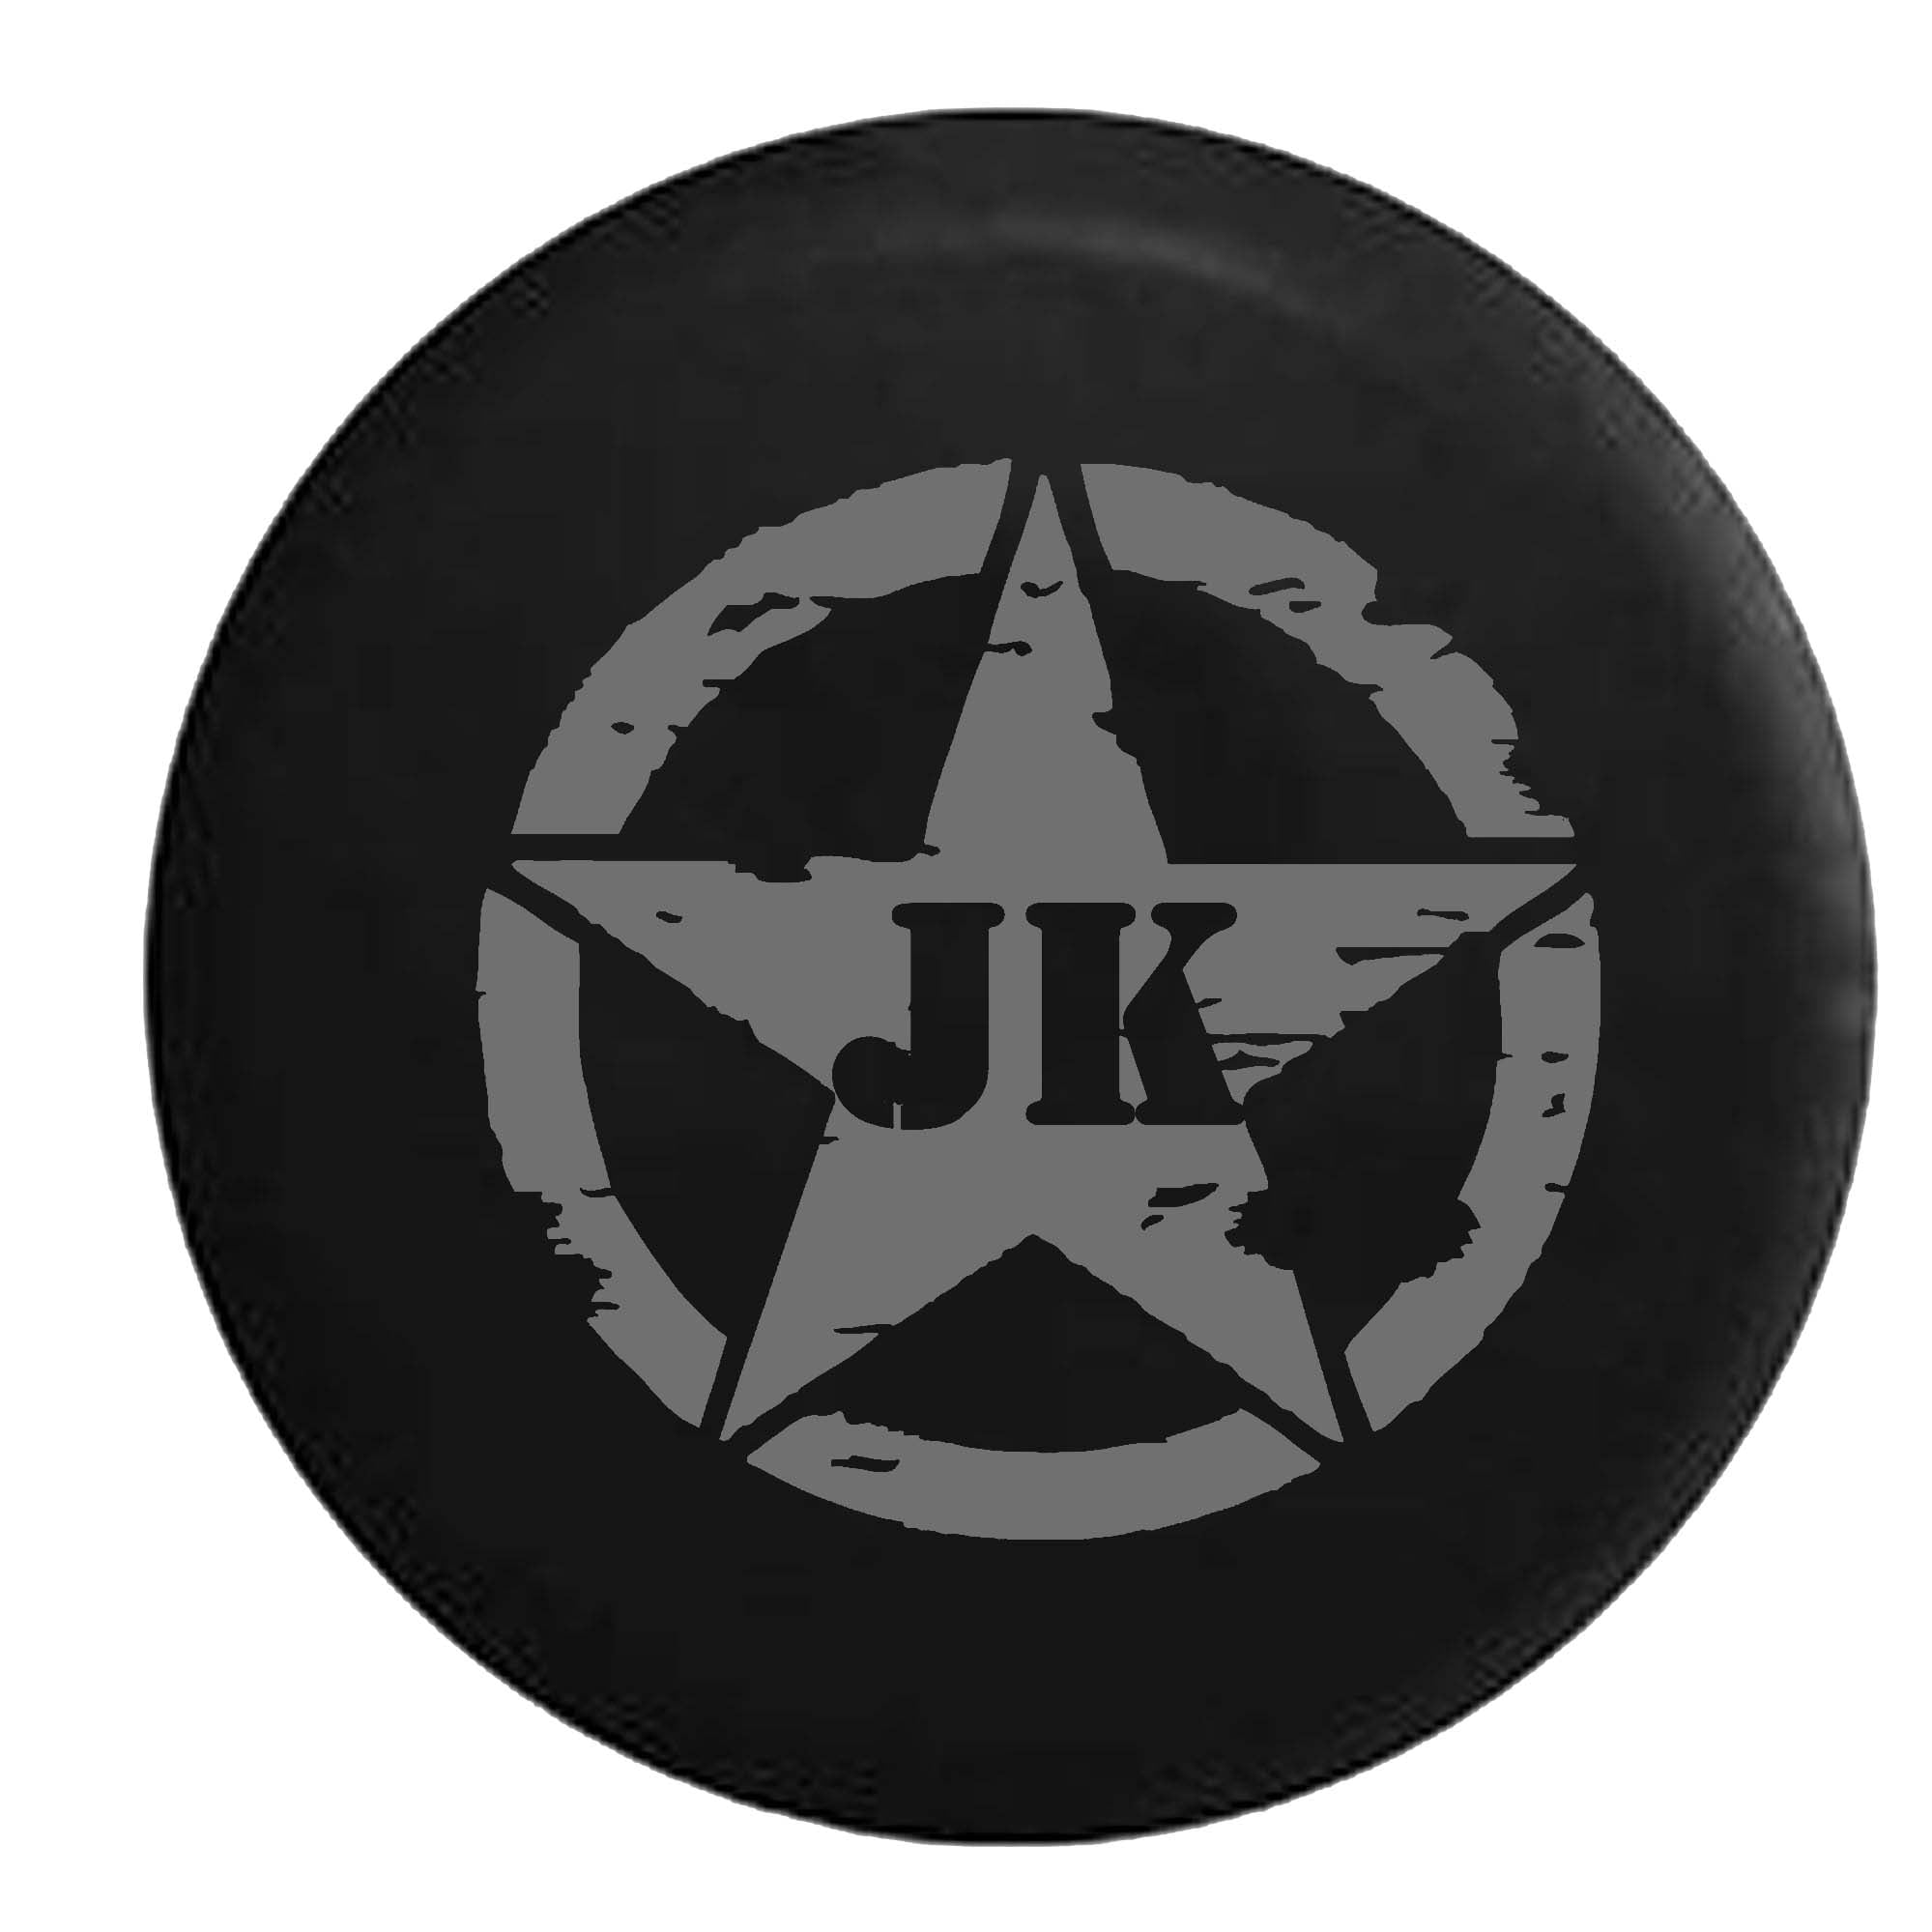 star wars jeep tire cover